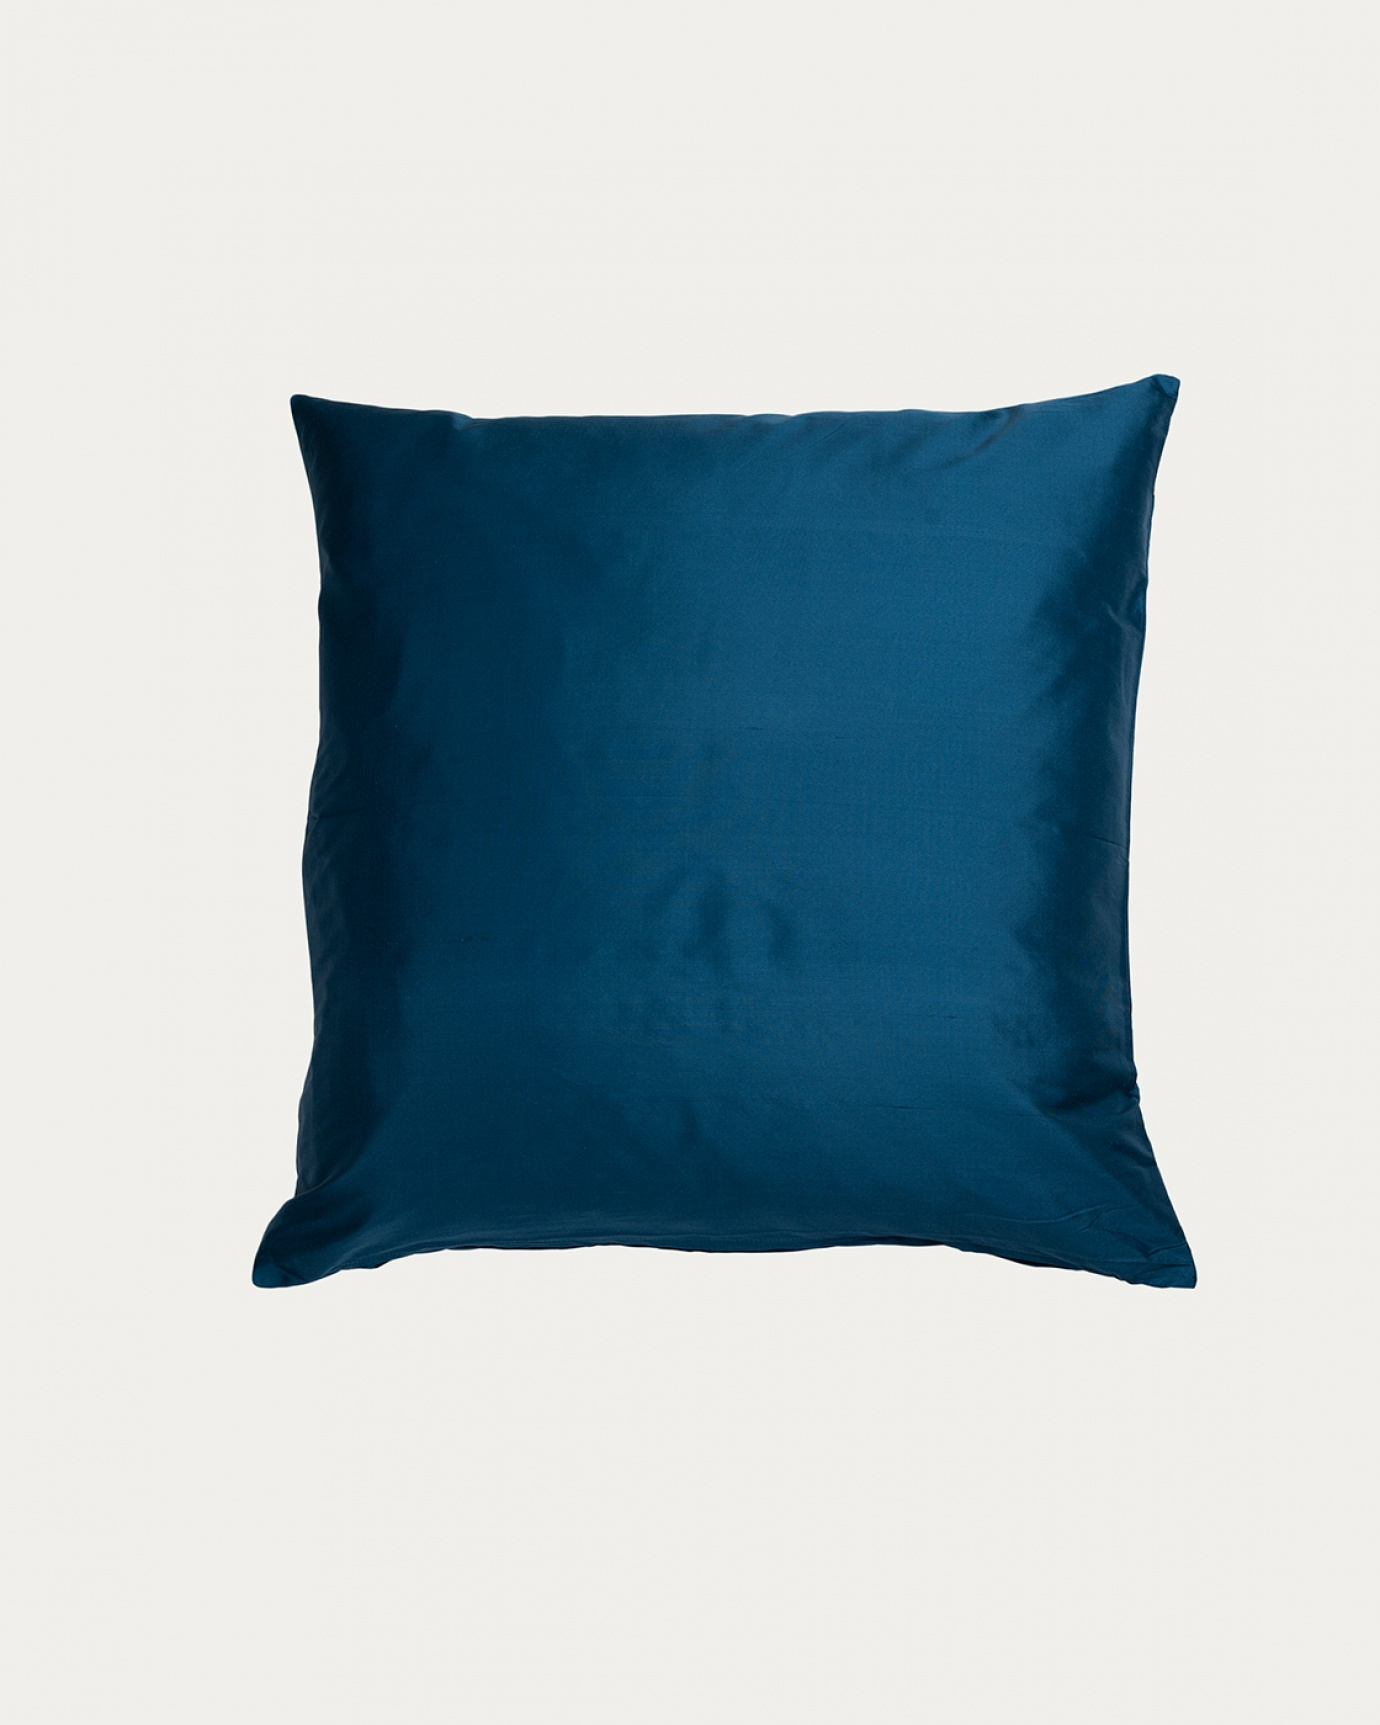 Product image deep sea blue SILK cushion cover made of 100% dupion silk that gives a nice lustre from LINUM DESIGN. Size 40x40 cm.